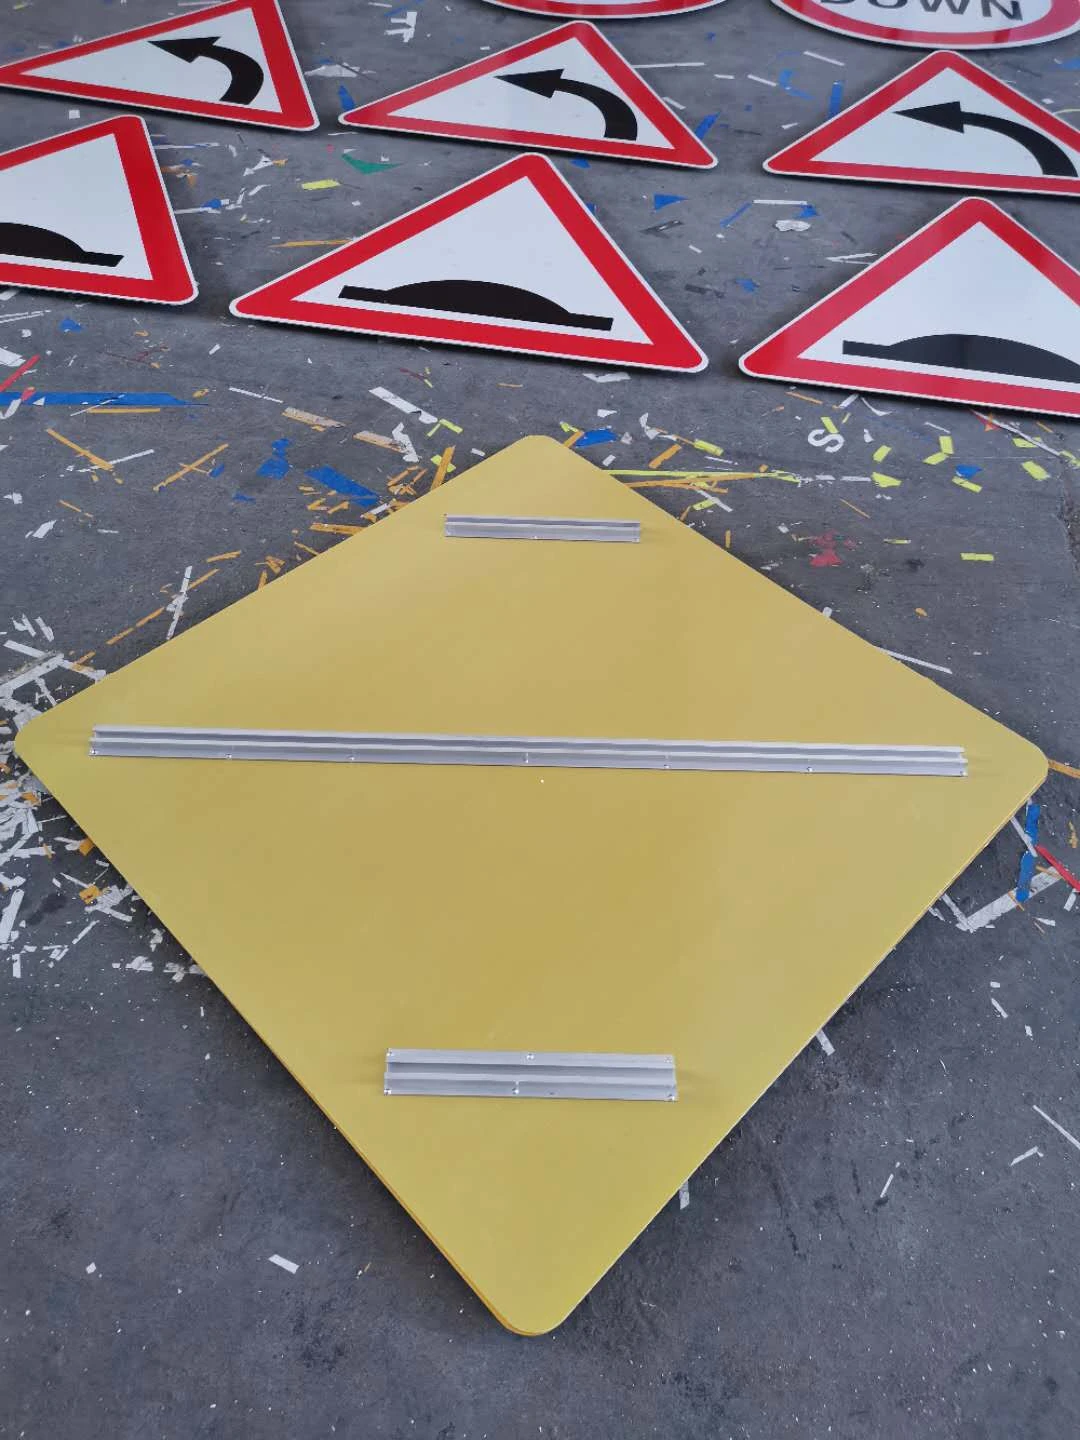 Specializing in the production of epoxy boards, insulation boards, traffic signs